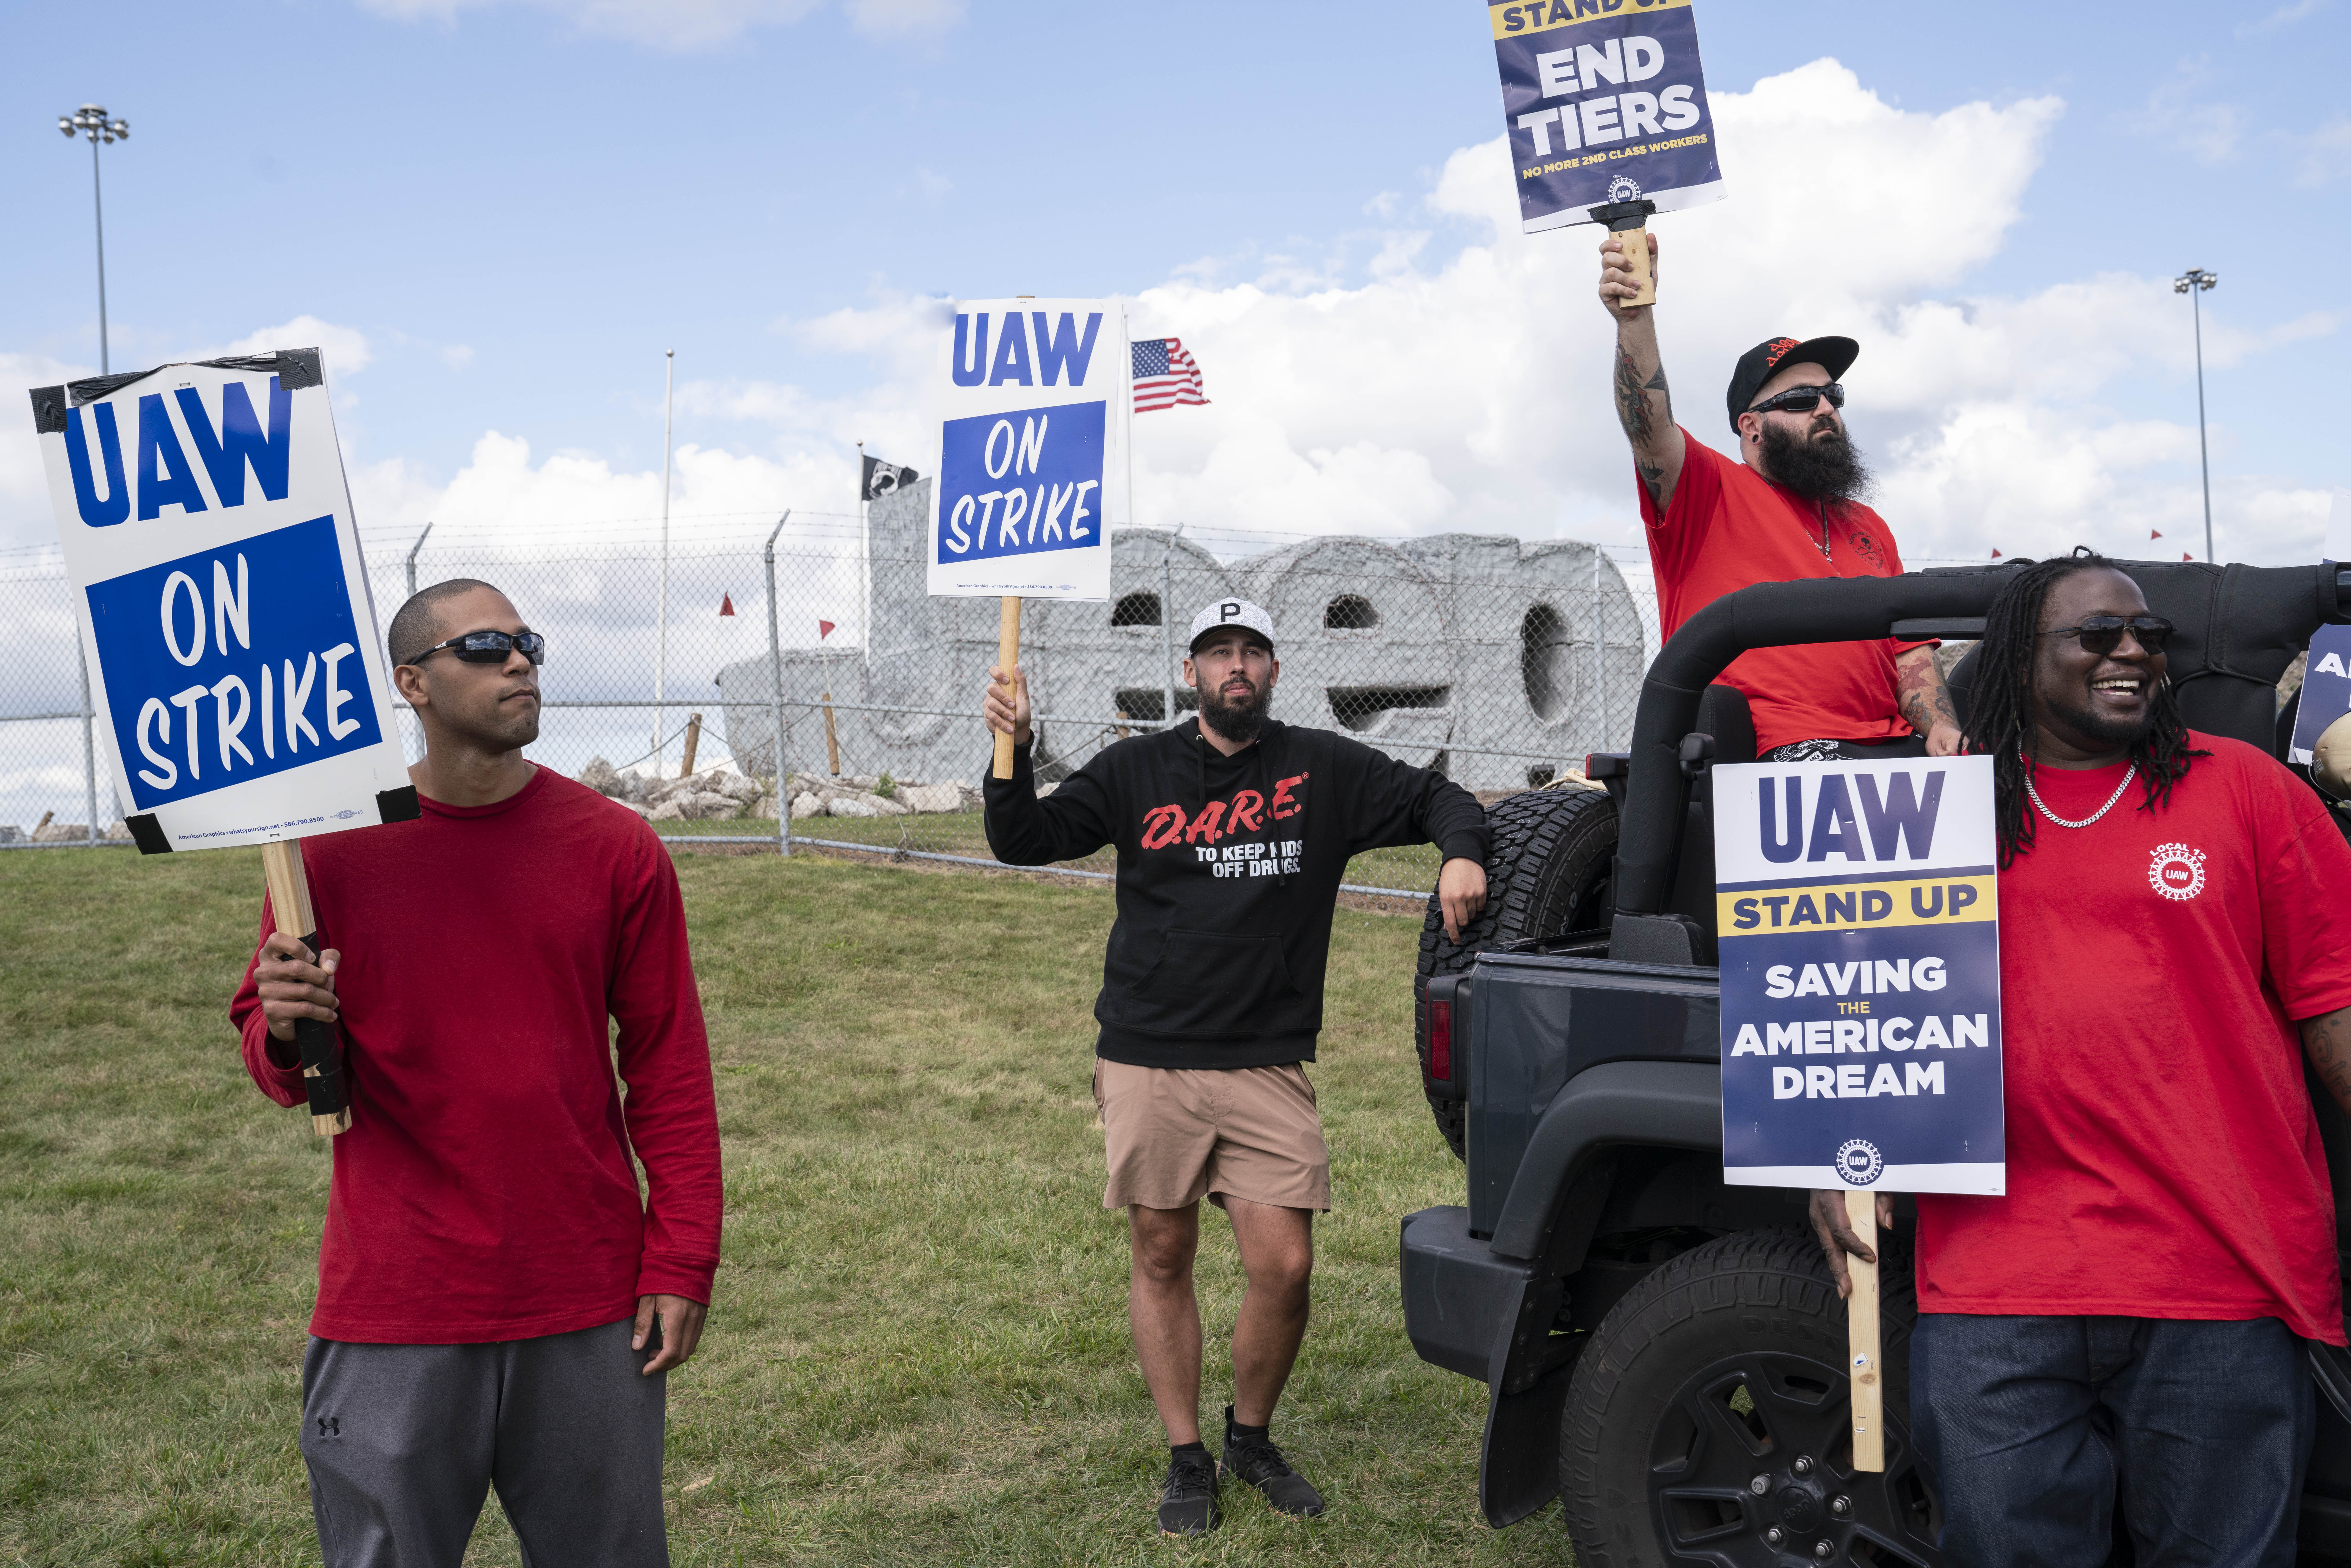 United Auto Workers (UAW) members Caleb Delphine, Brian Brooker, Michael Gatto and James Triplett picket outside a Jeep plant on September 18, 2023 in Toledo, Ohio.  The UAW walked out of three locations Thursday night at midnight, marking the first time they have been simultaneously on strike at the Big Three automakers Ford, General Motors and Stellantis.  (Photo by Sarah Rice/Getty Images)